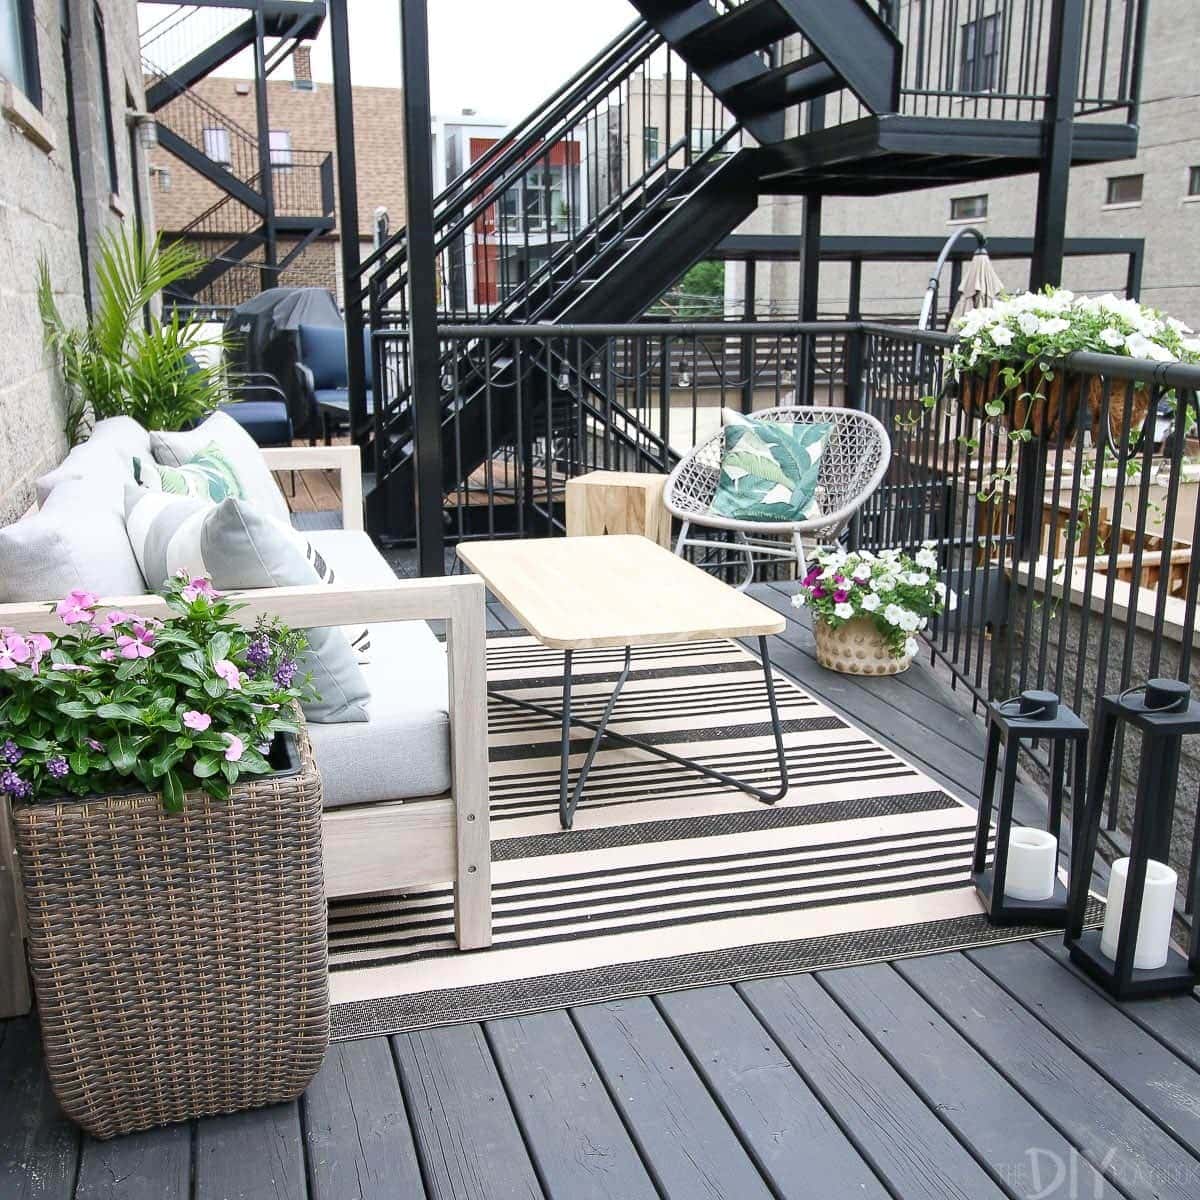 How to figure out patio furniture layout in a space